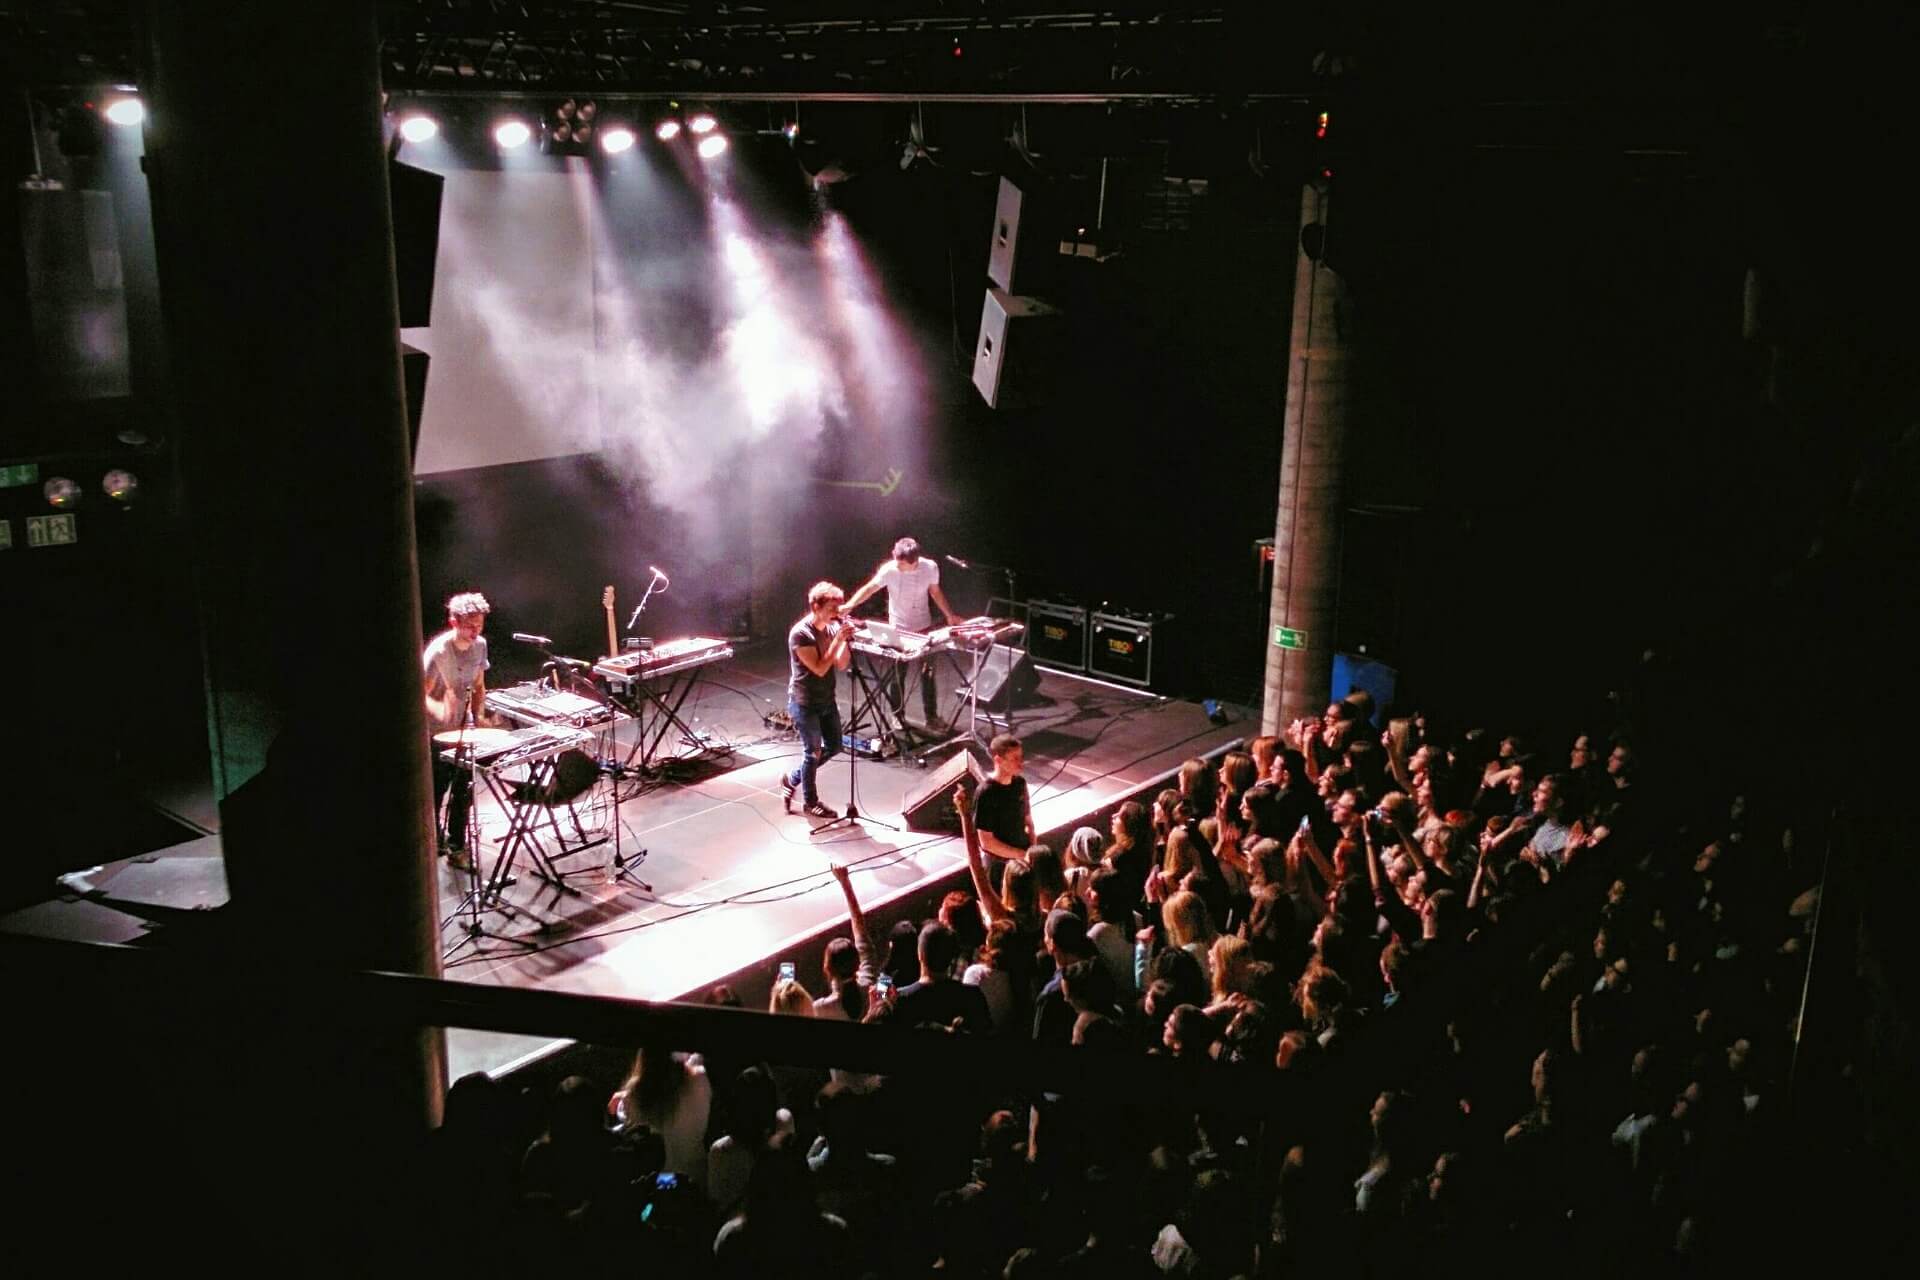 Band playing a mid-sized concert venue